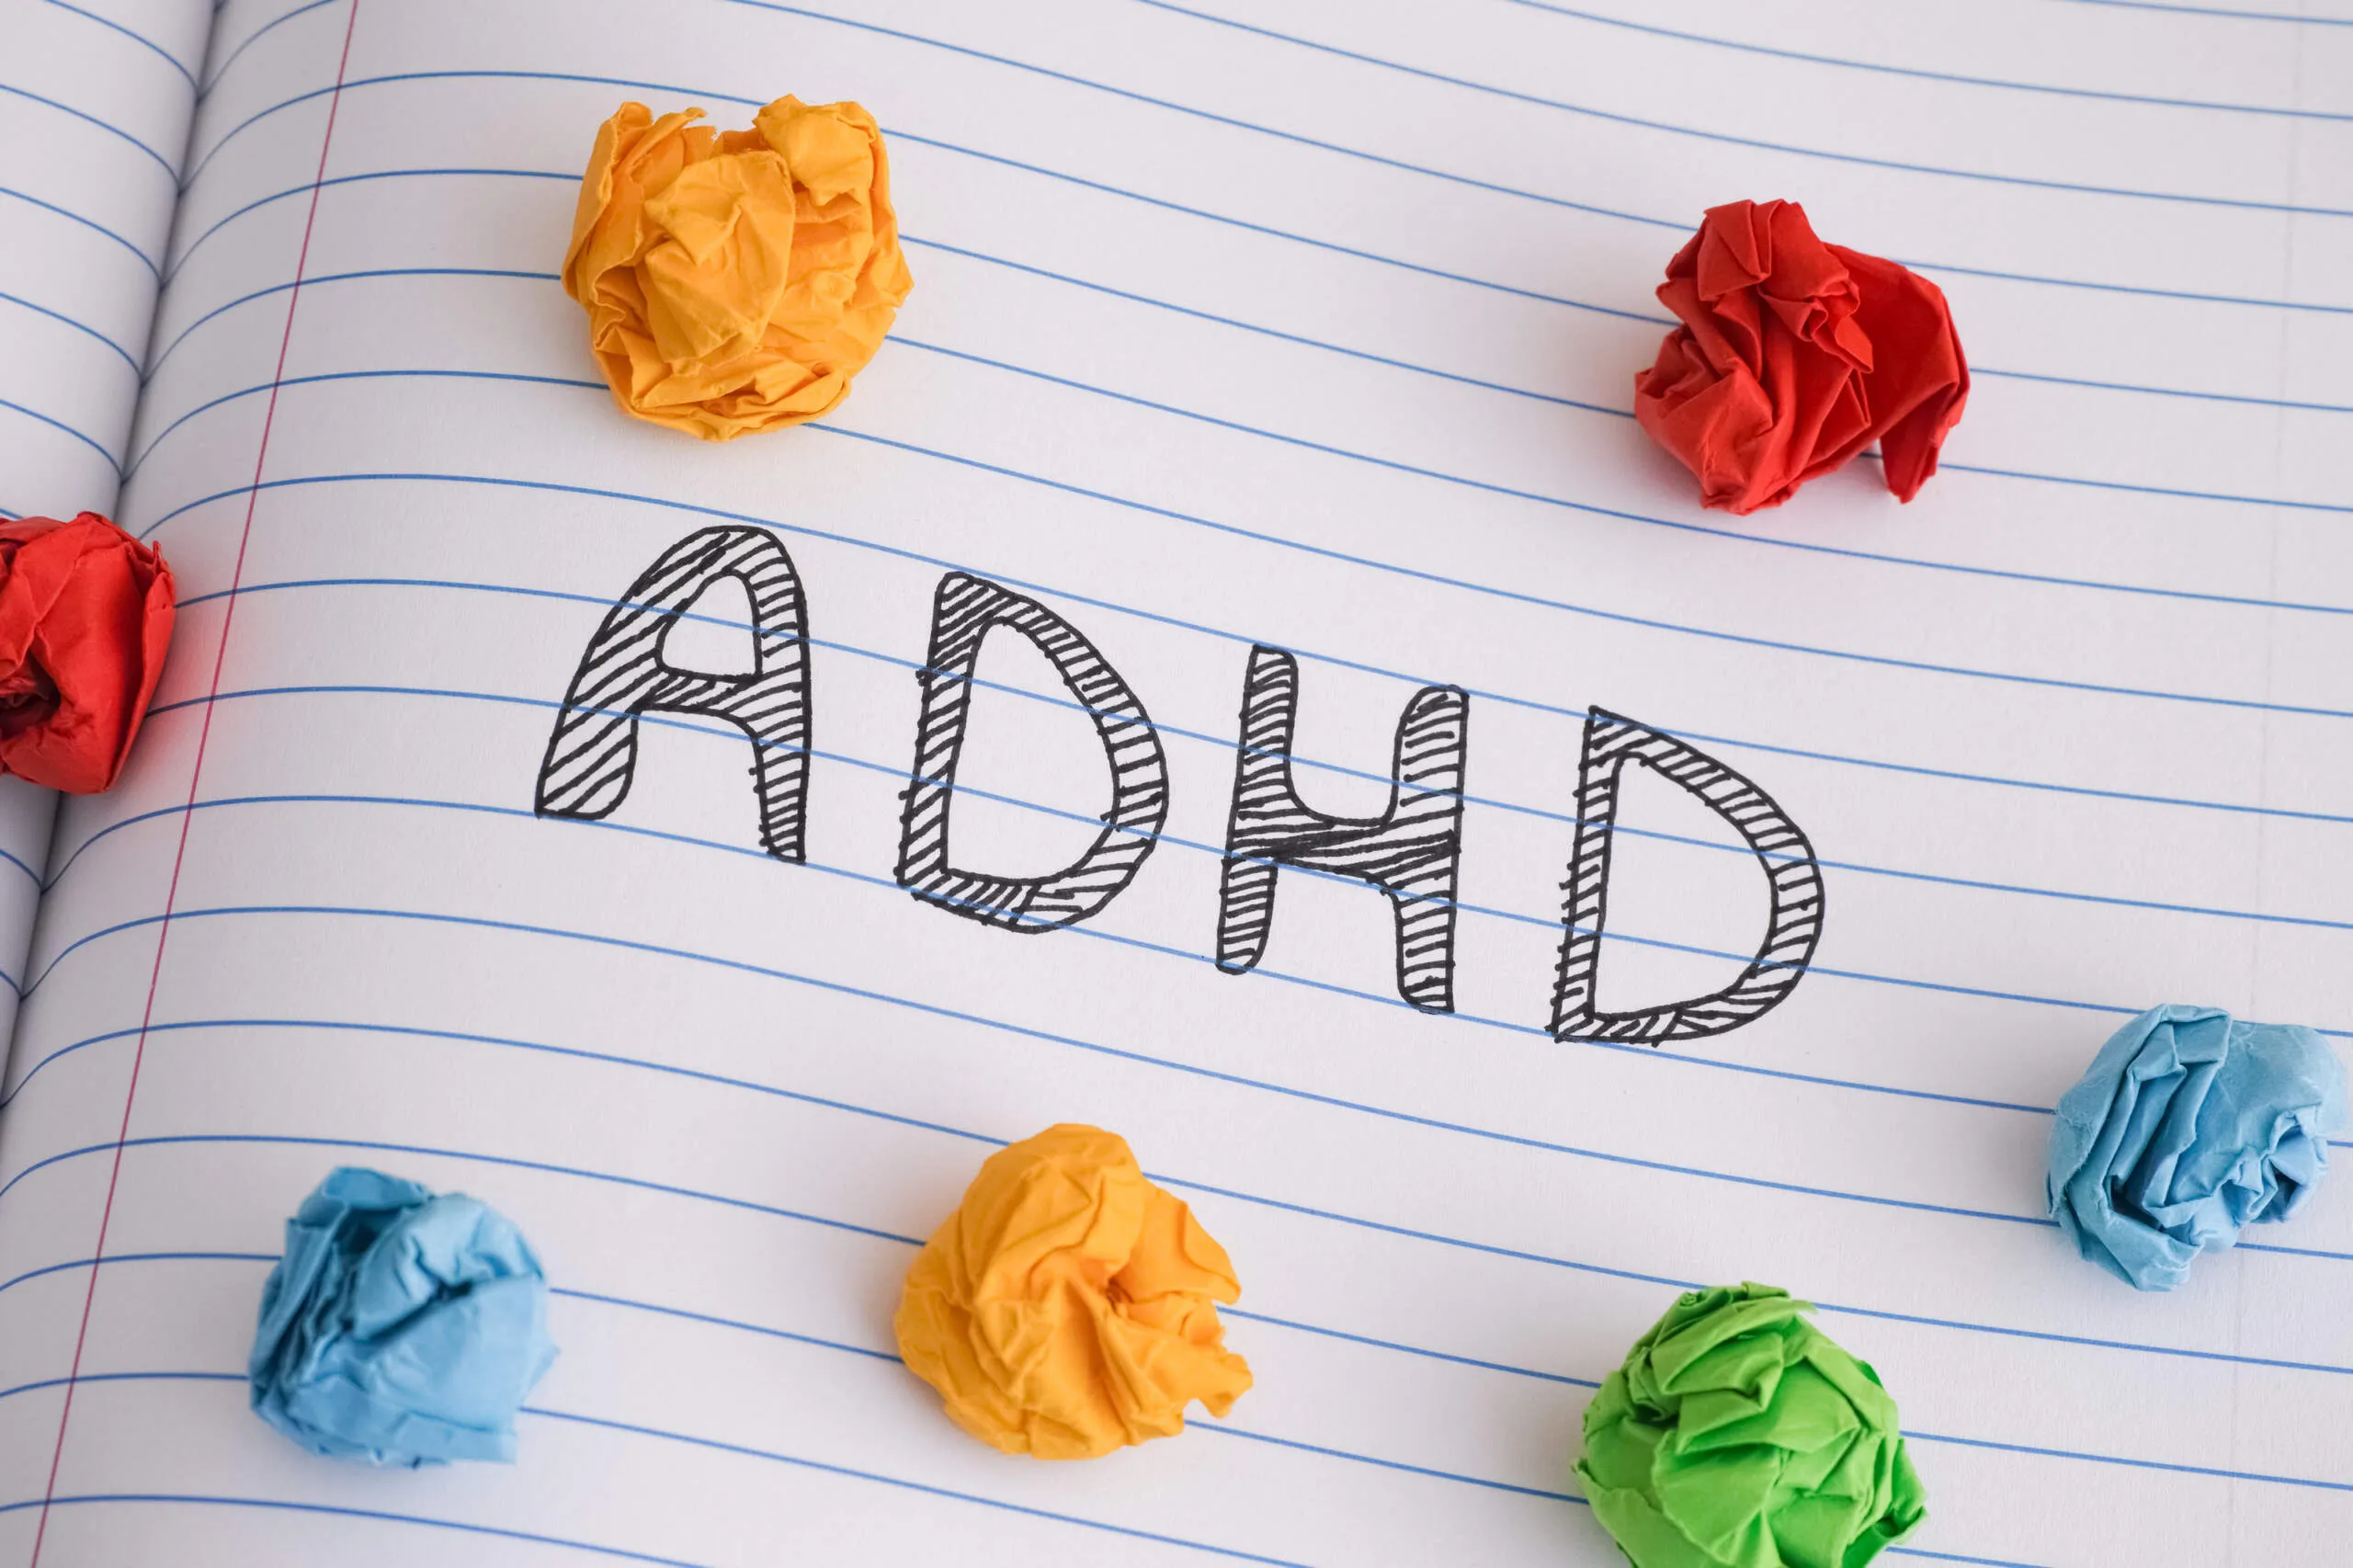 Treatment Options for ADHD